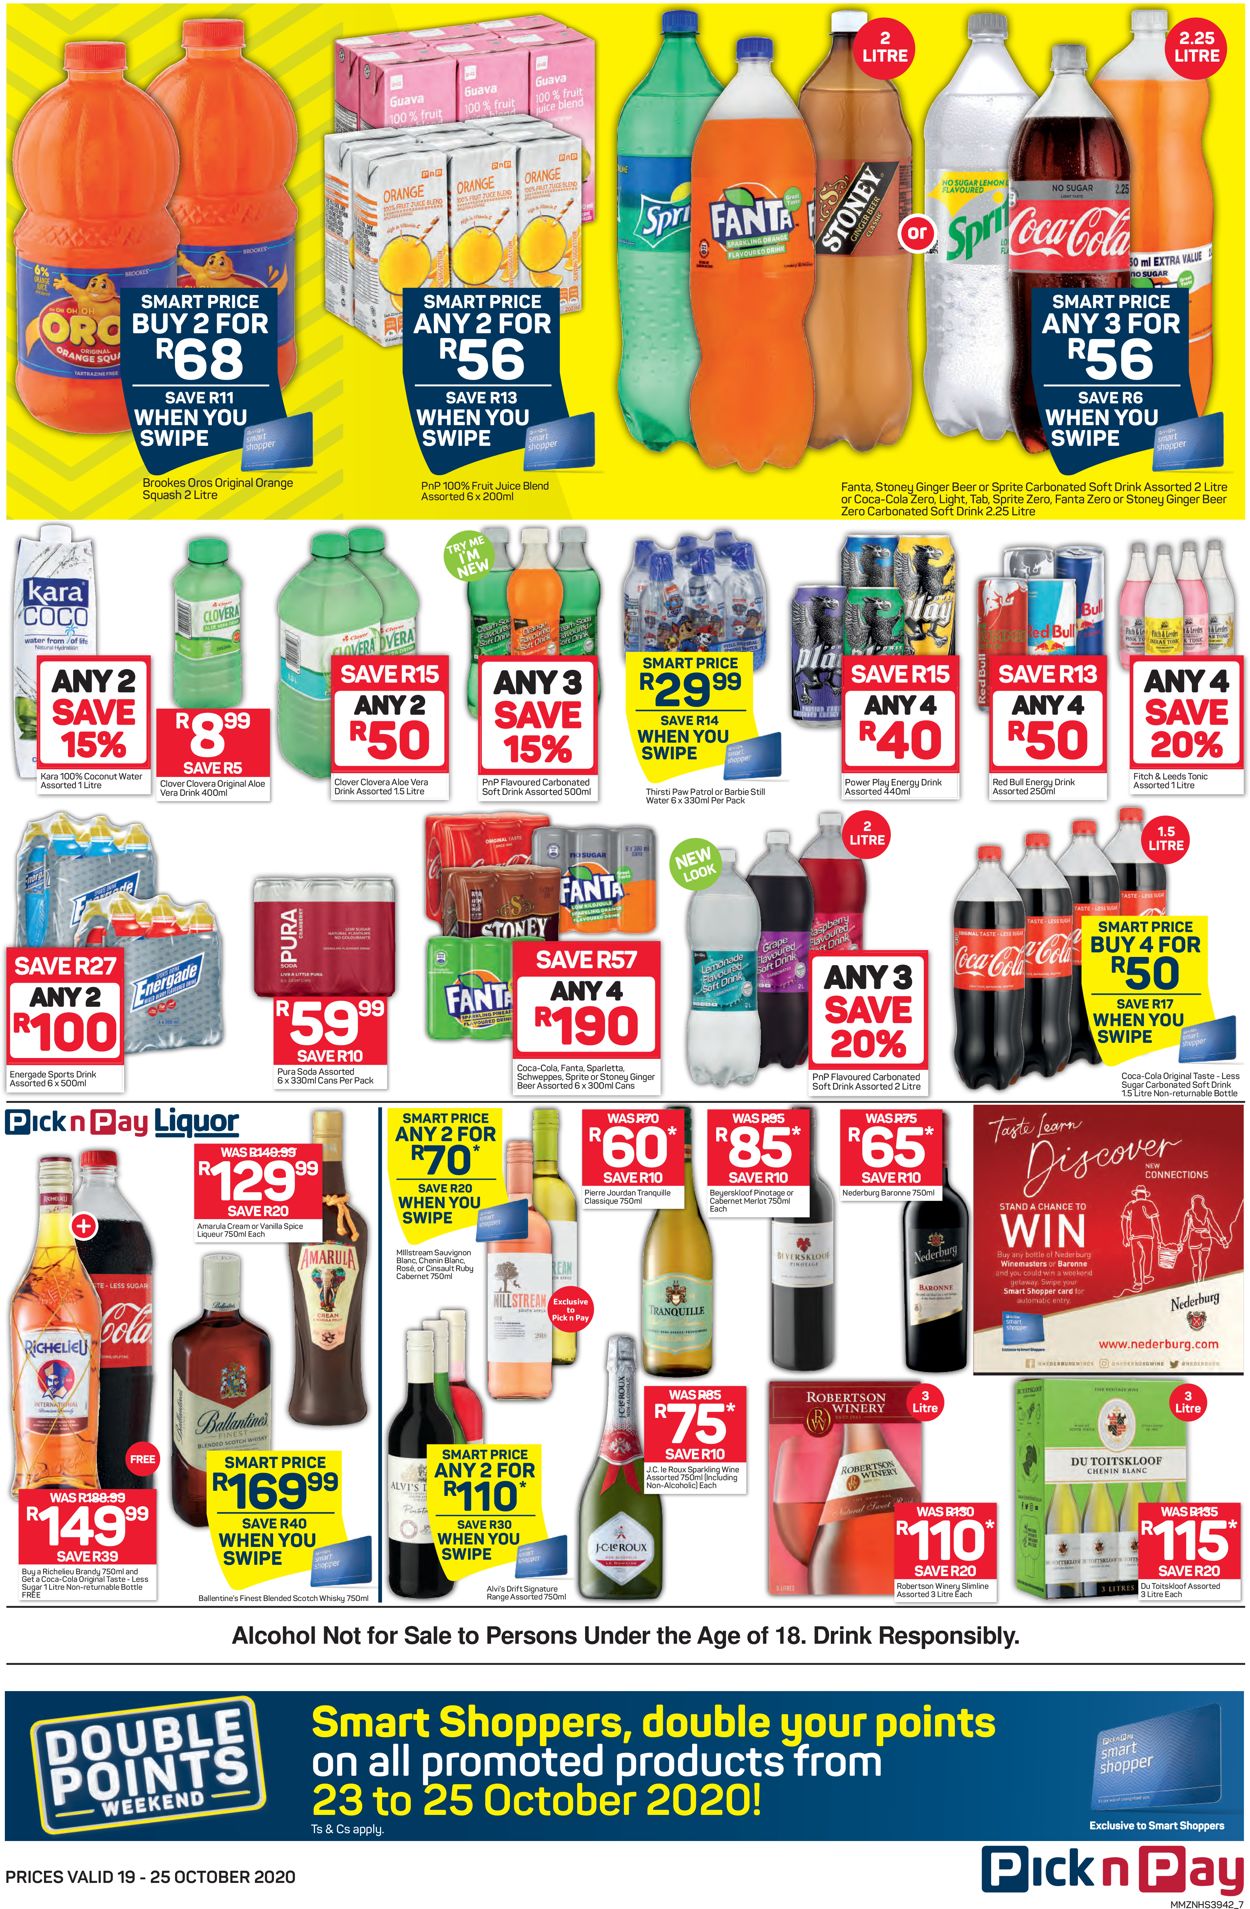 Pick n Pay Current catalogue 2020/10/19 2020/10/25 [7]